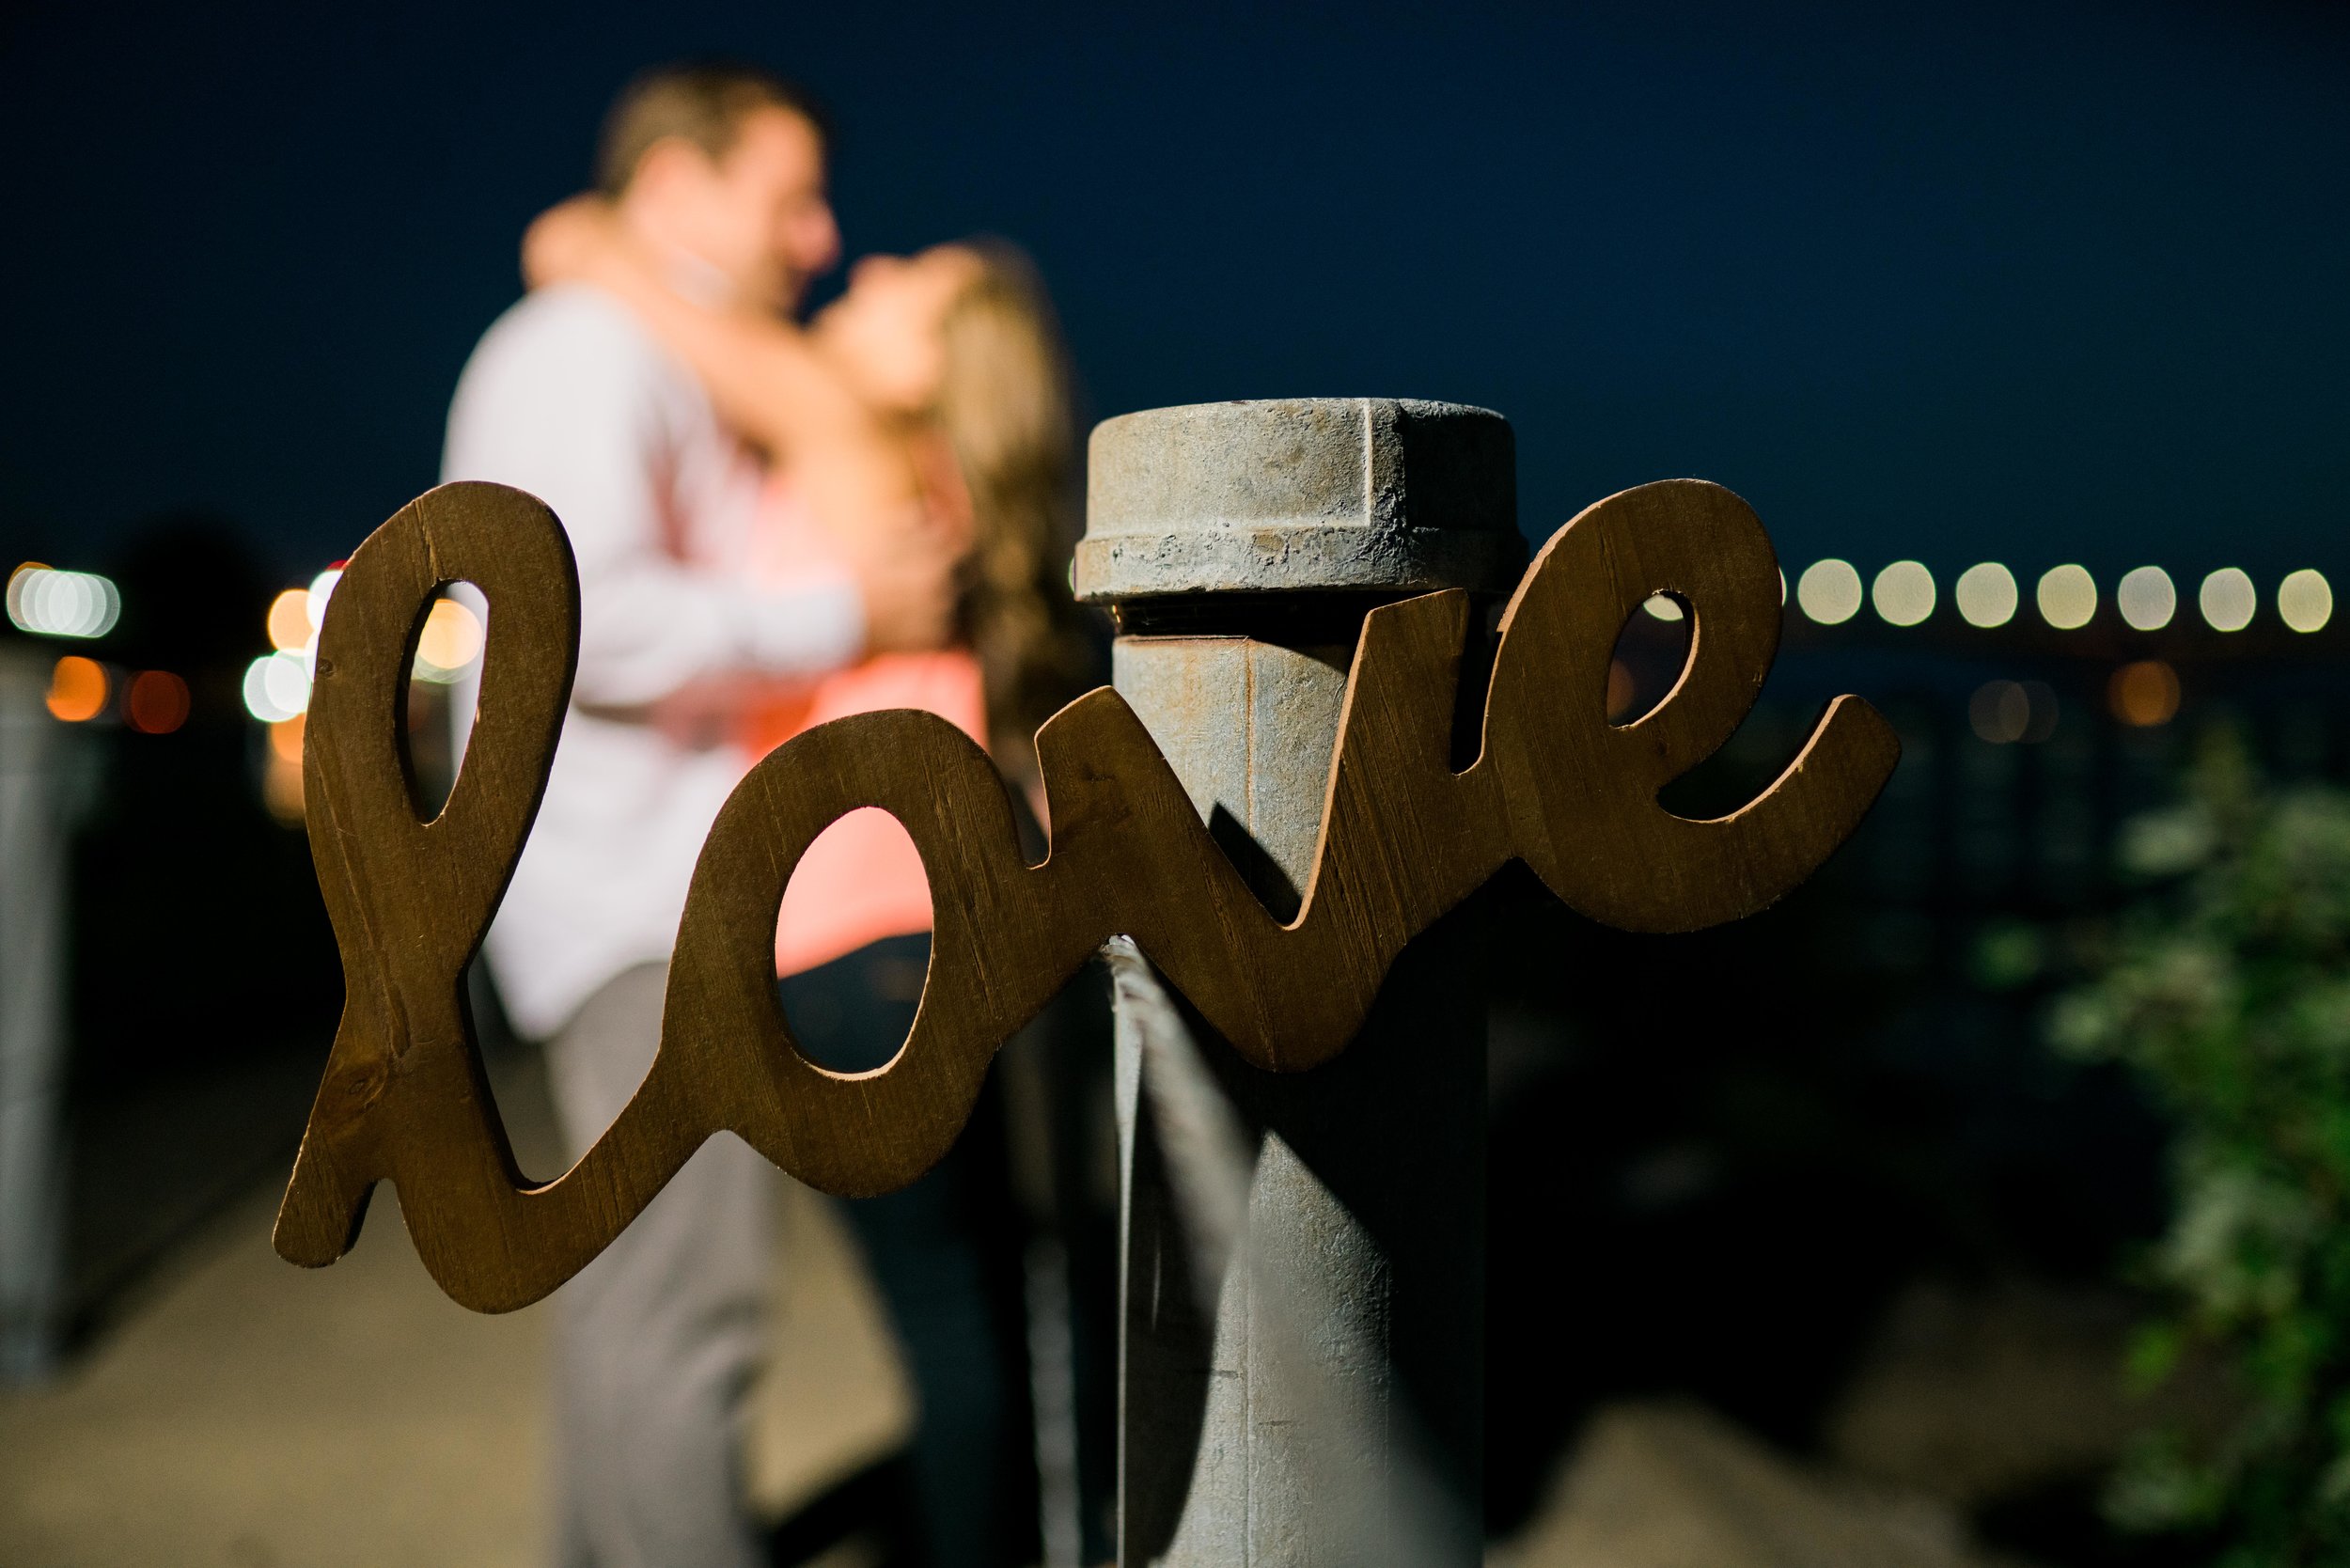 Nancy and David Engagement Photography by Stefan Ludwig in Buffalo NY-52.jpg